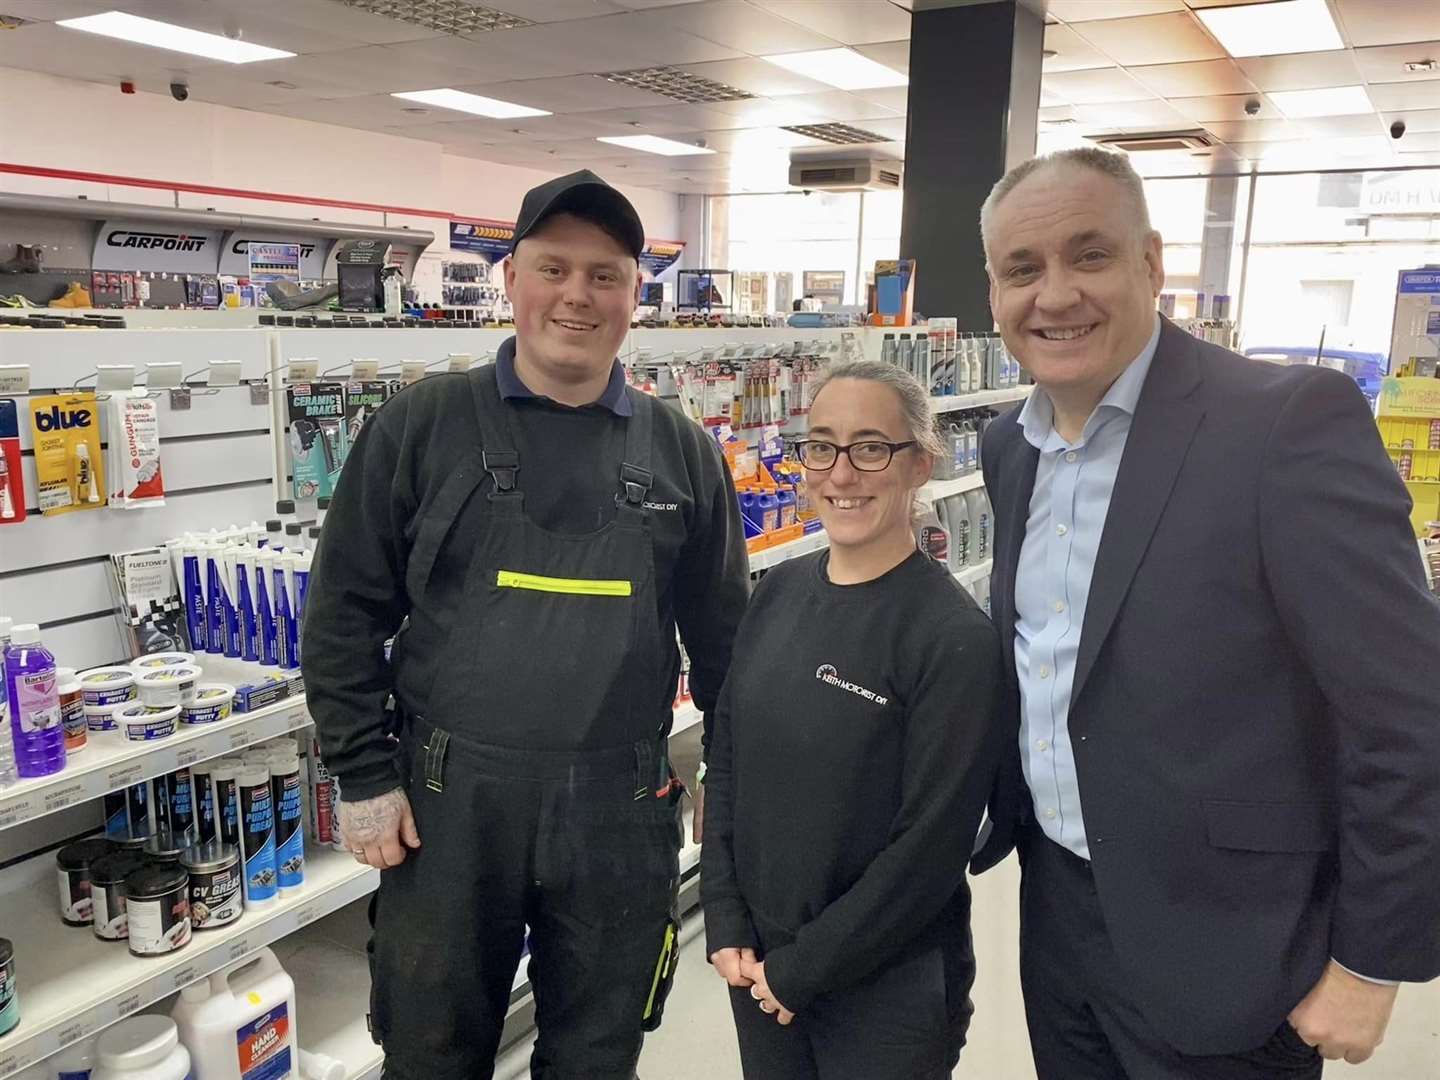 Richard Lochhead, who is now Small Business, Innovation and Trade minister, with Keirin and Clare Kellas at Keith Motorist DIY.